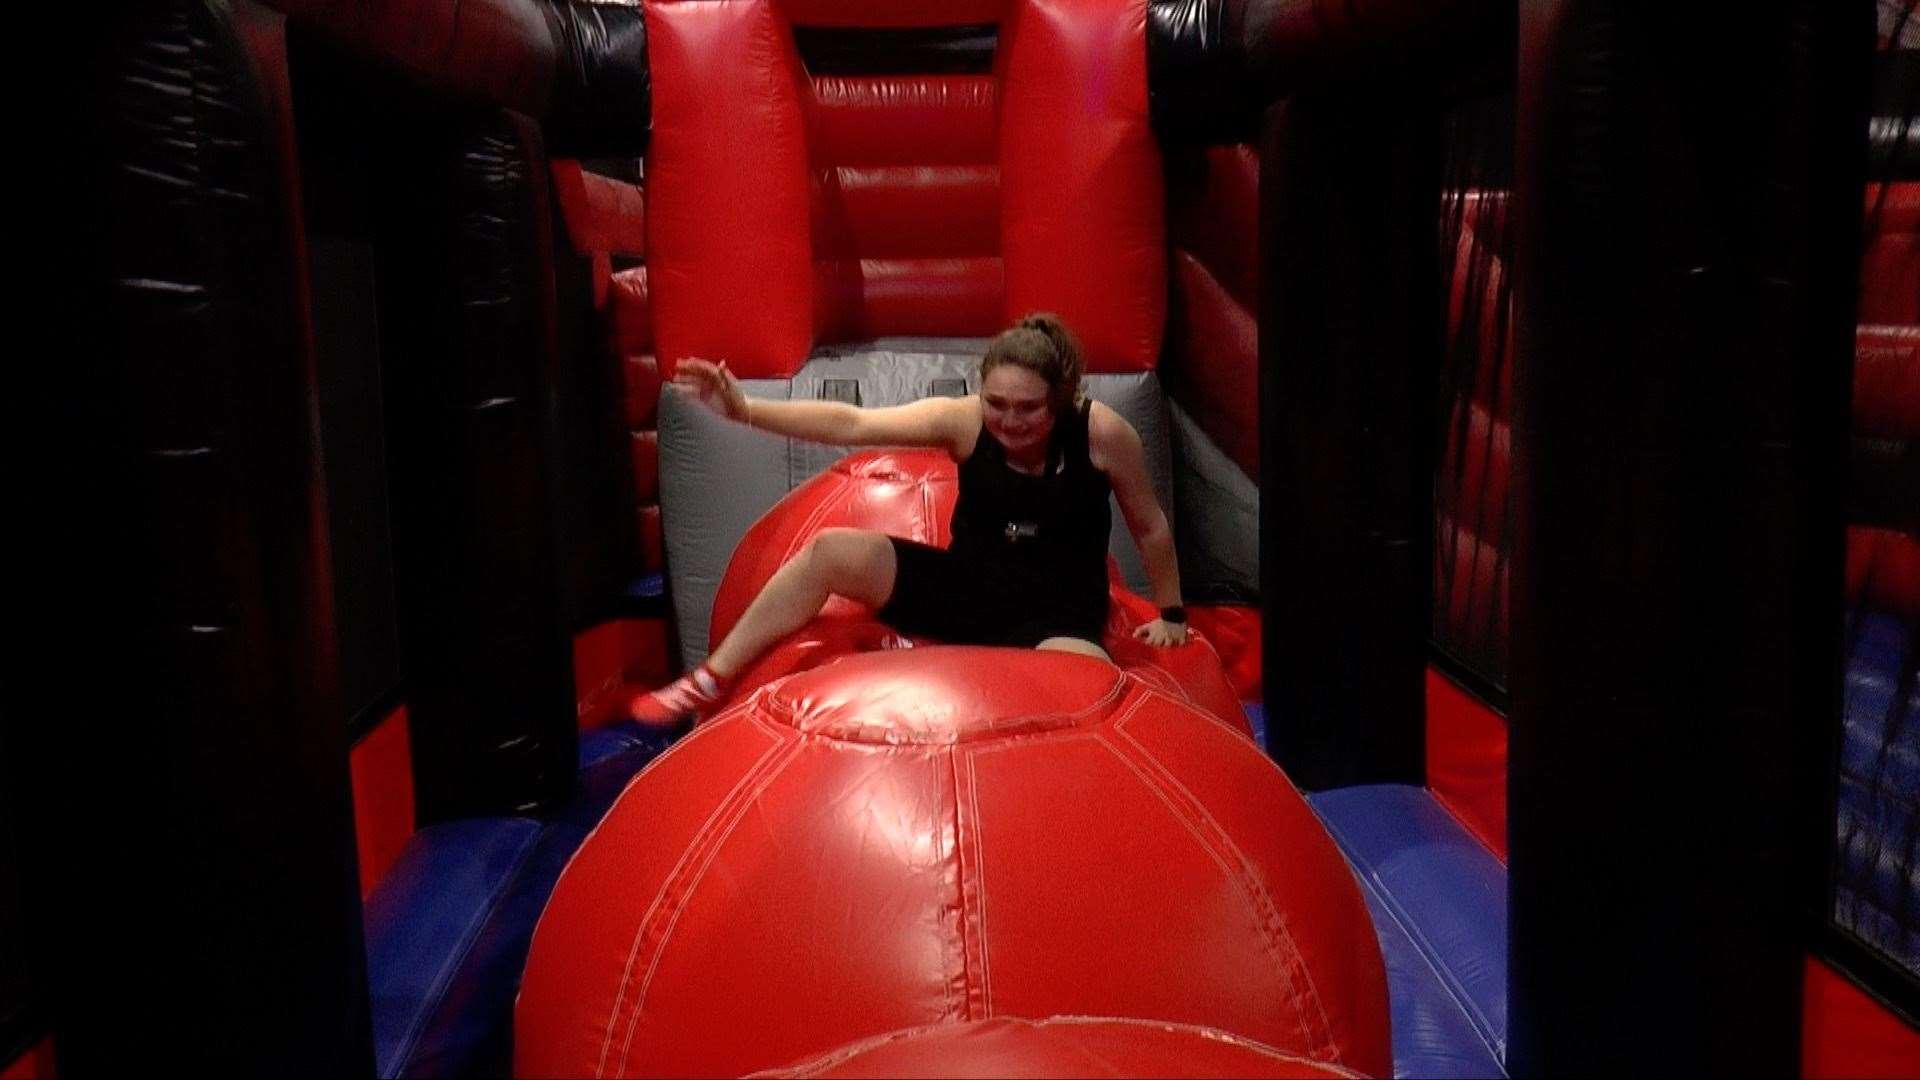 Megan attempting the red balls